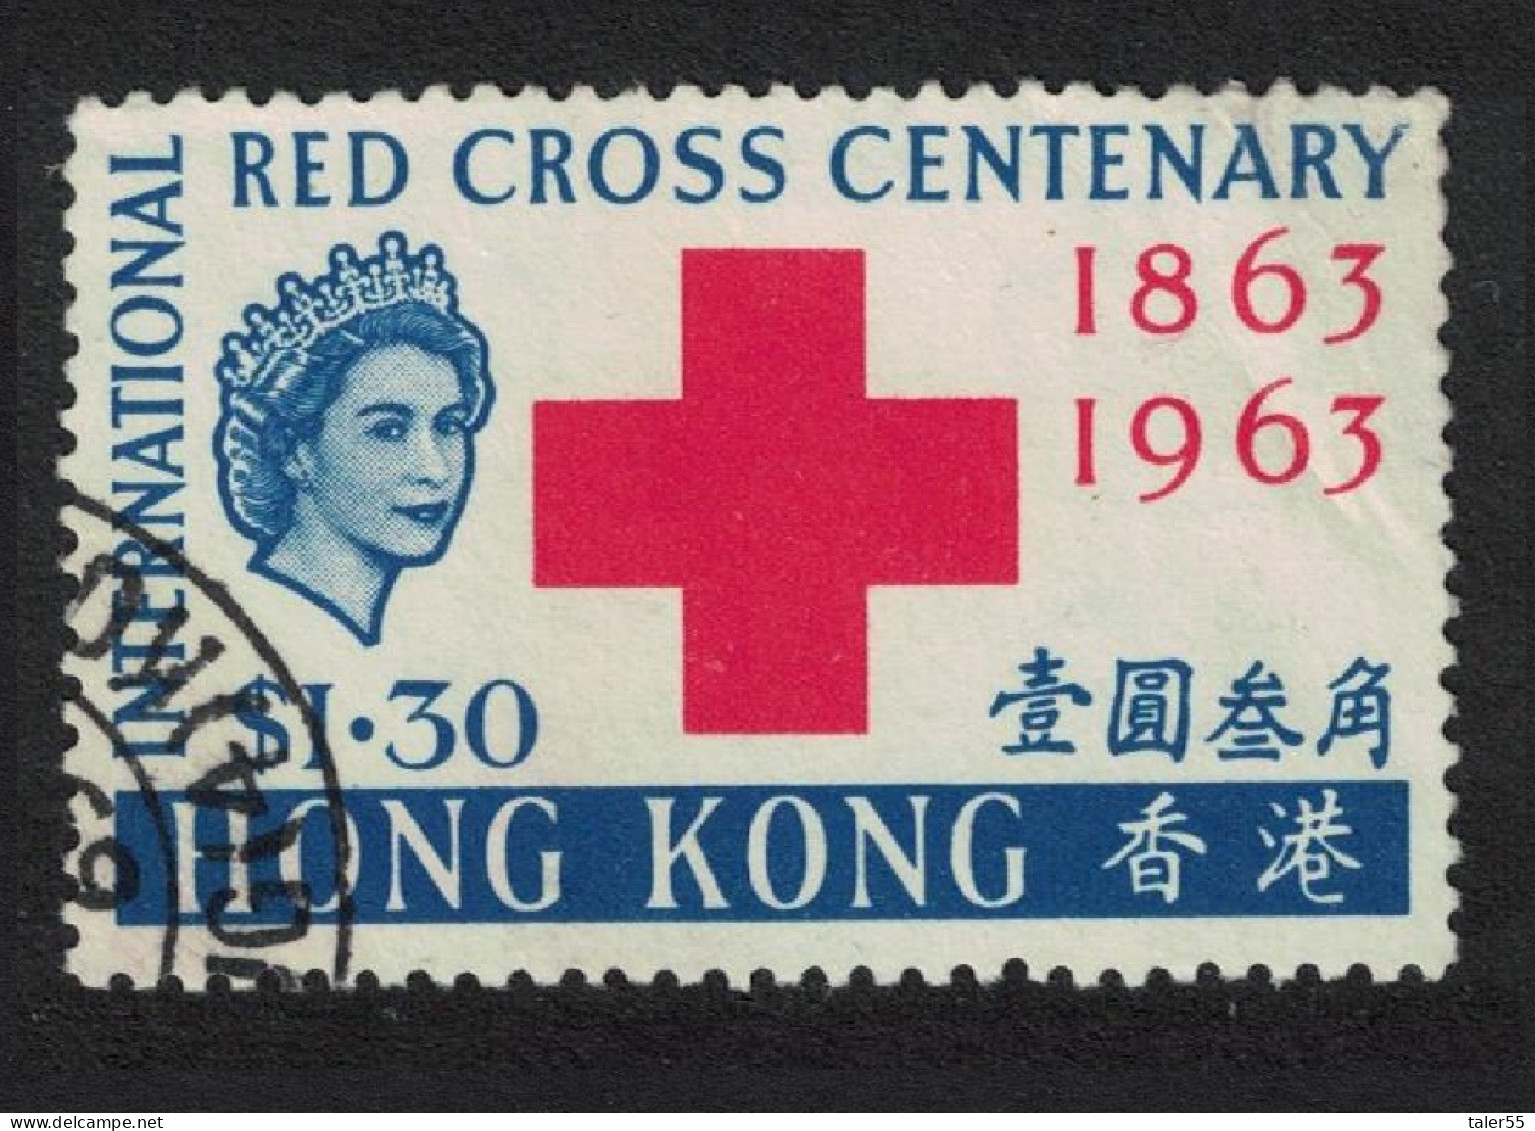 Hong Kong Centenary Of Red Cross $1.30 T1 1963 Canc SG#213 - Used Stamps